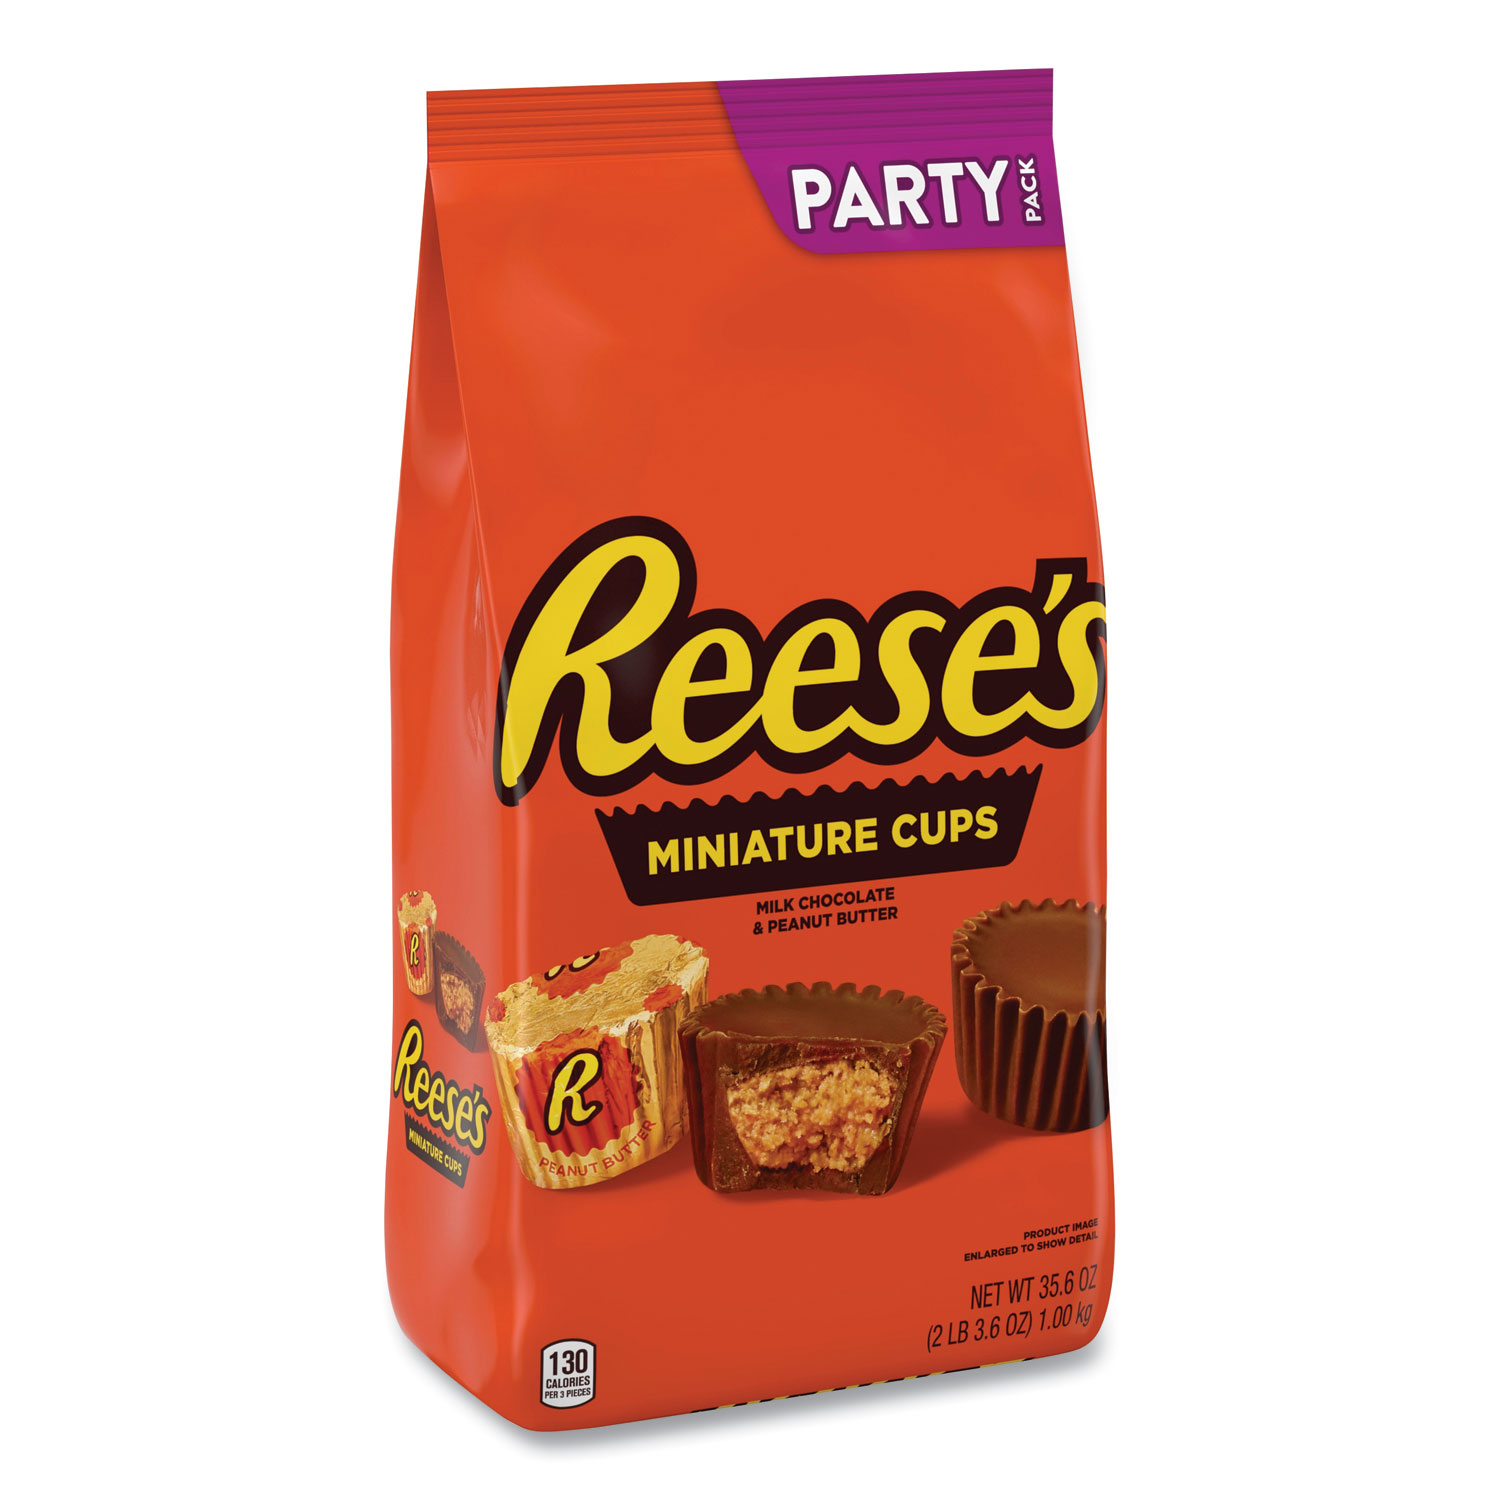  Reese's 44709 Peanut Butter Cups Miniatures Party Pack, Milk Chocolate, 35.6 oz Bag, Free Delivery in 1-4 Business Days (GRR24600412) 